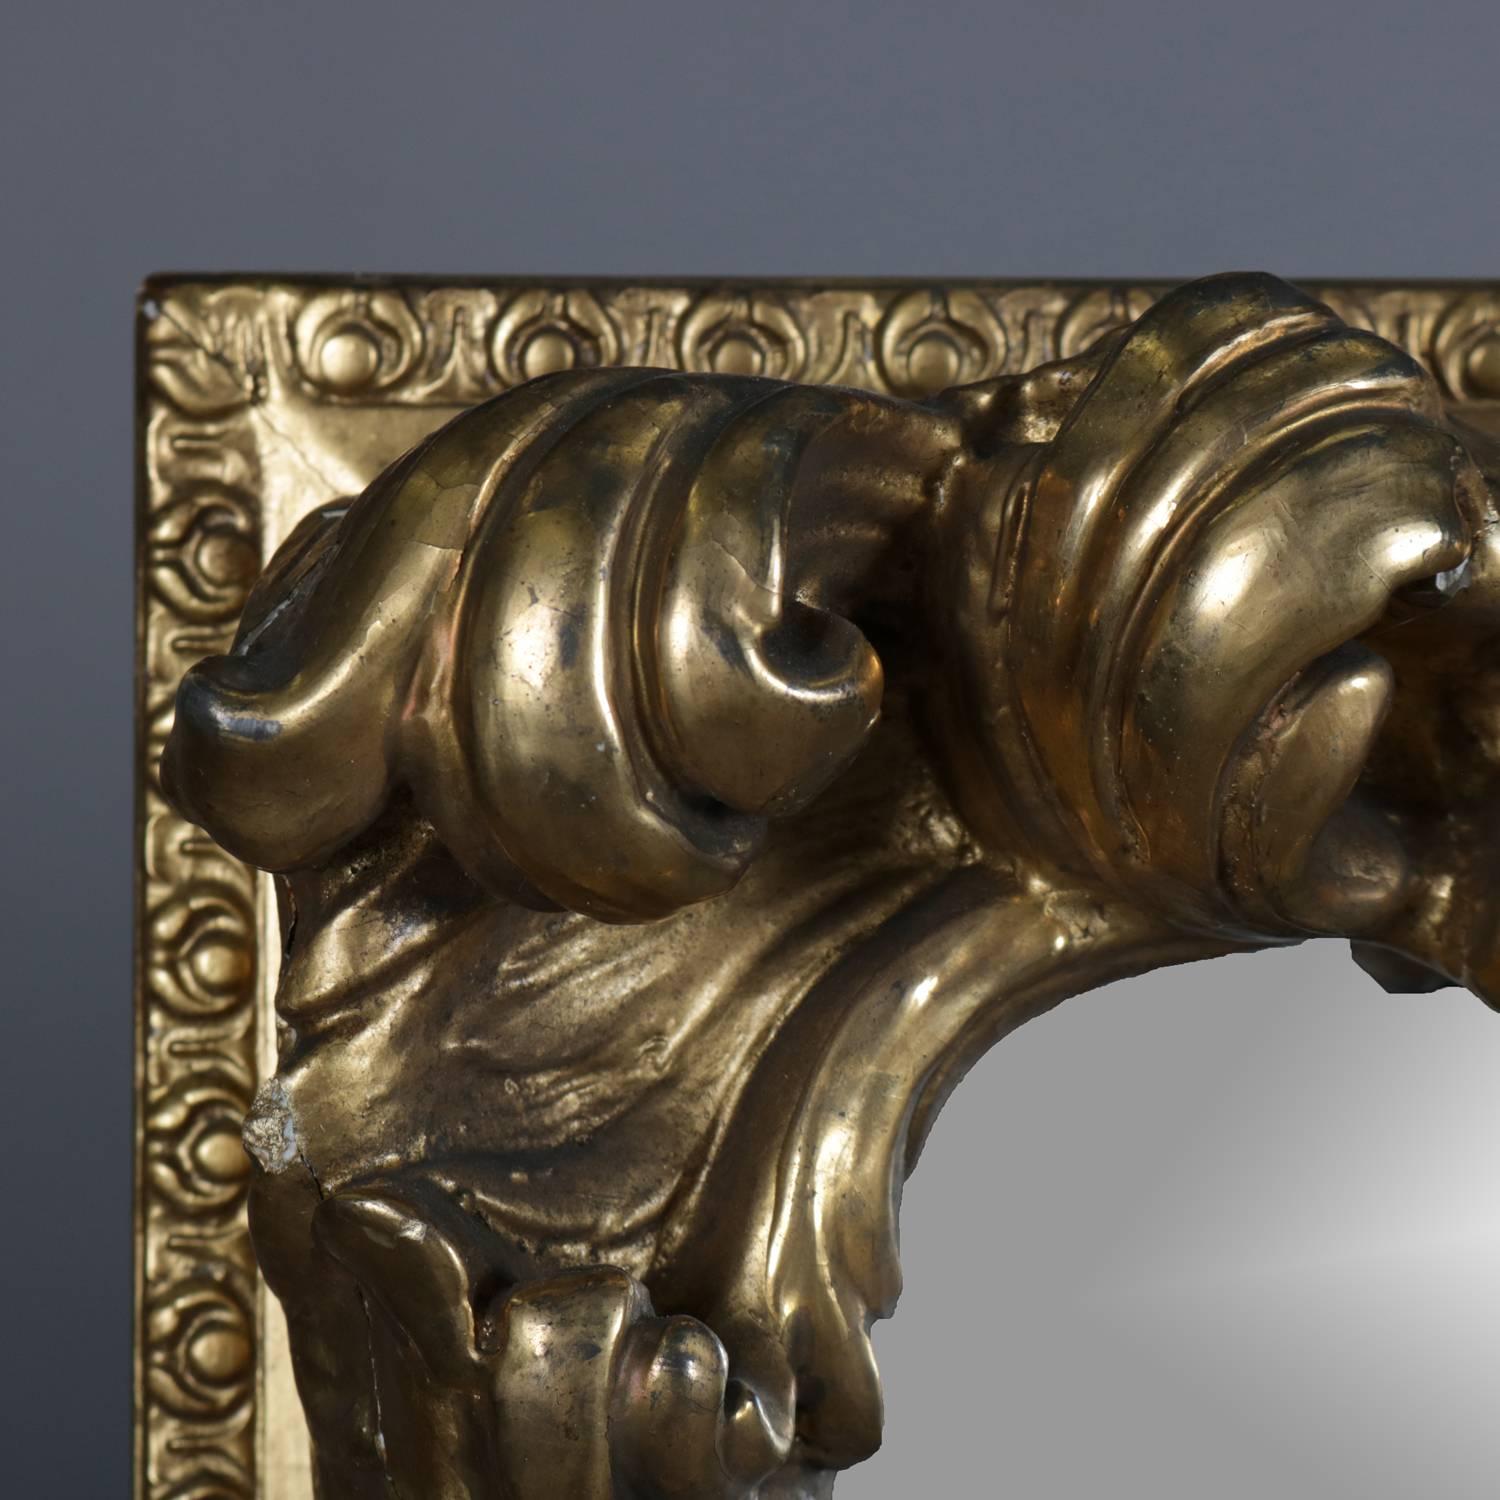 Antique foliate wall mirror features first finish gilt on high relief foliate form gesso and wood frame, 19th century

***DELIVERY NOTICE – Due to COVID-19 we are employing NO-CONTACT PRACTICES in the transfer of purchased items.  Additionally, for